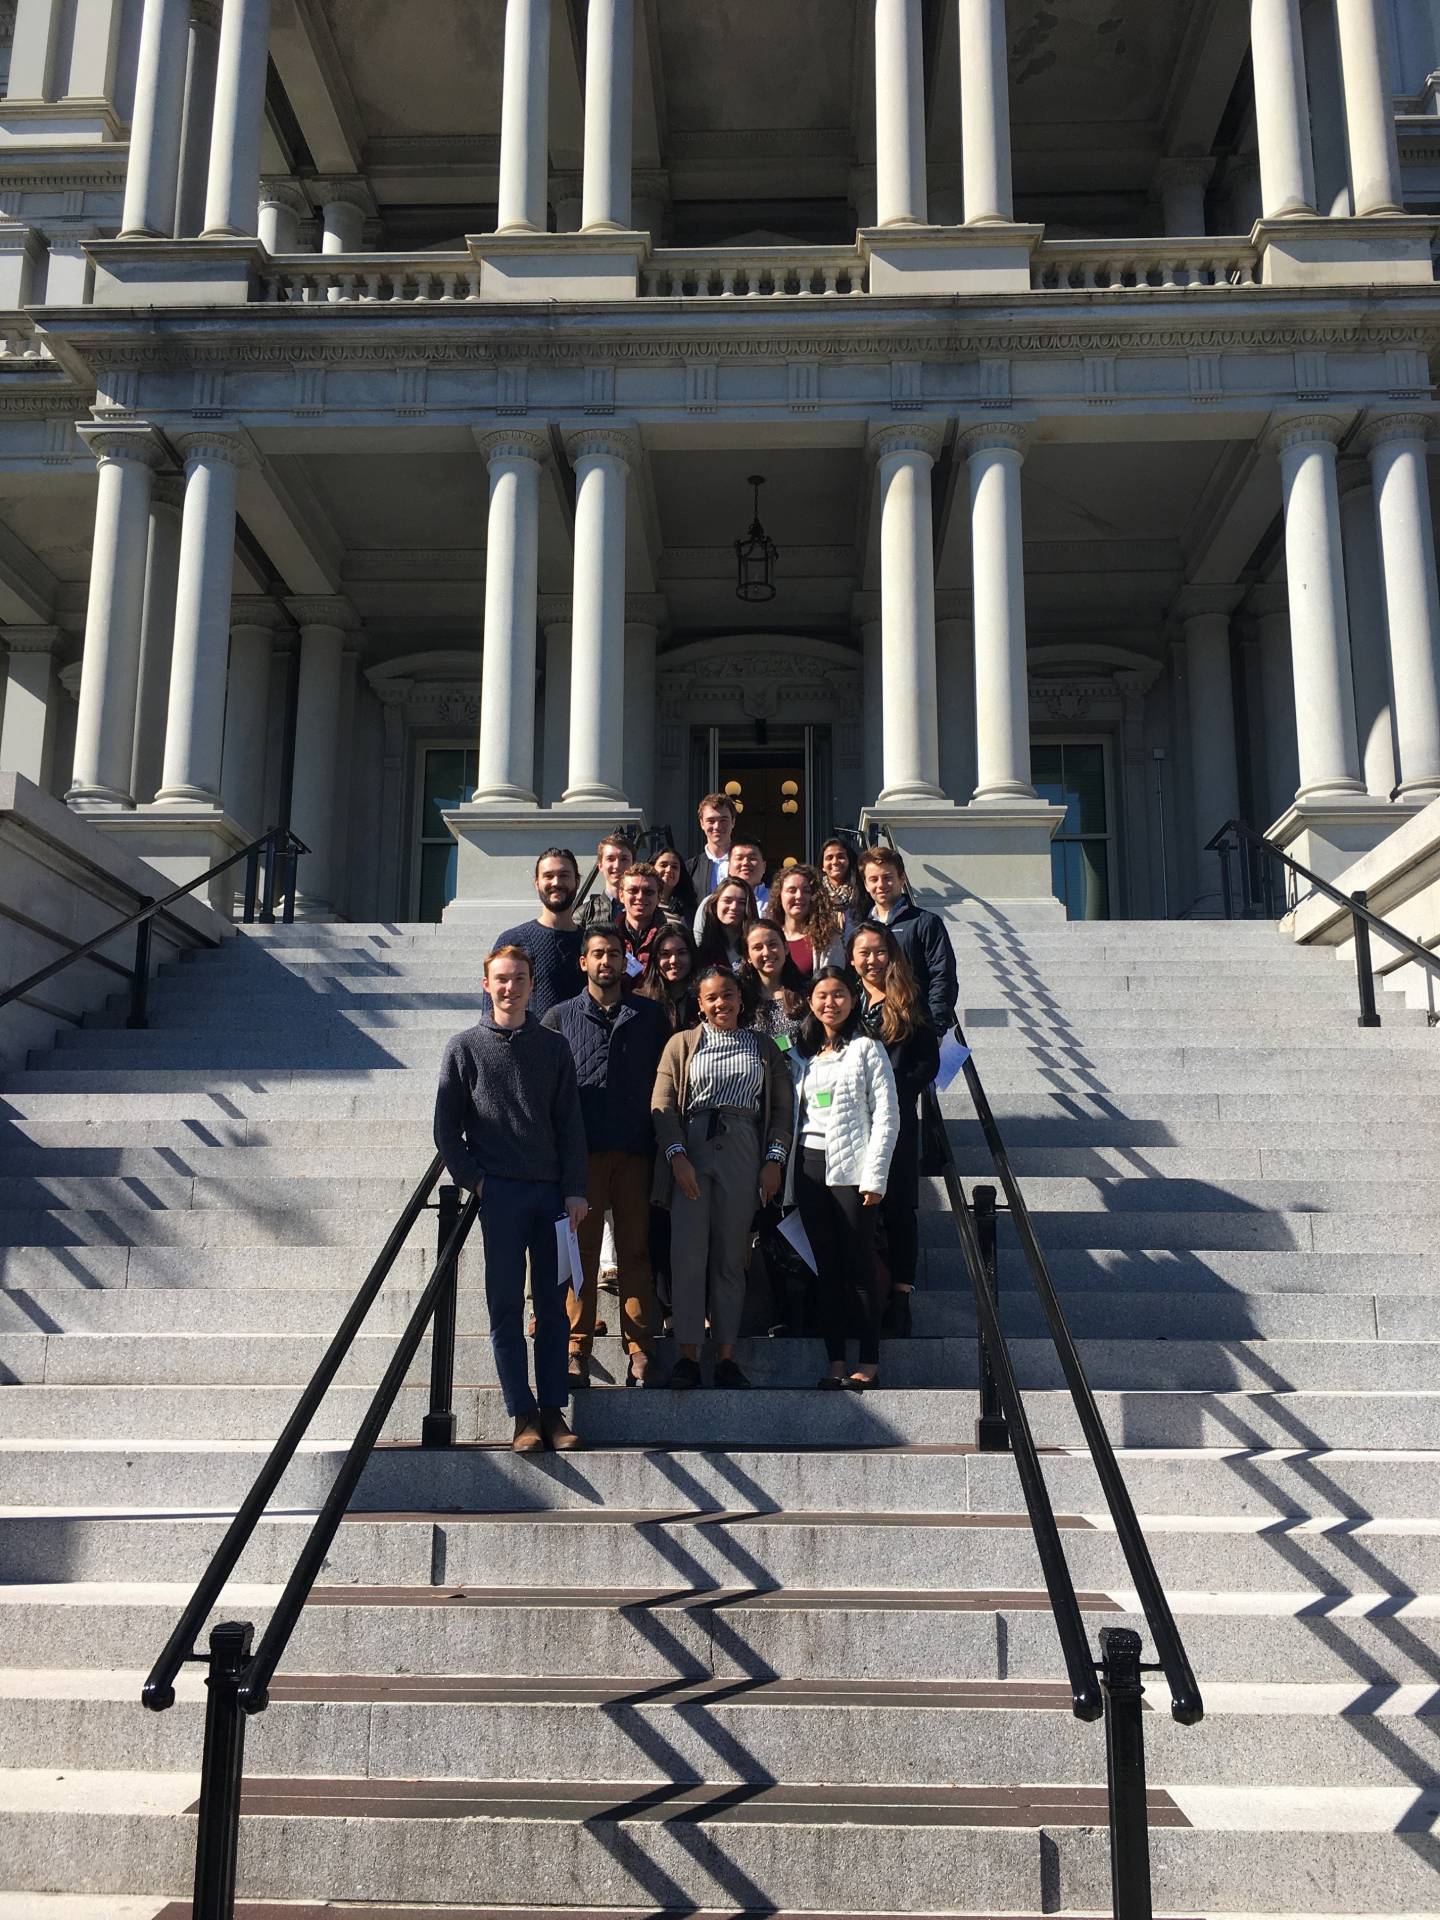 CITP students posing for group shot on steps in Washington.